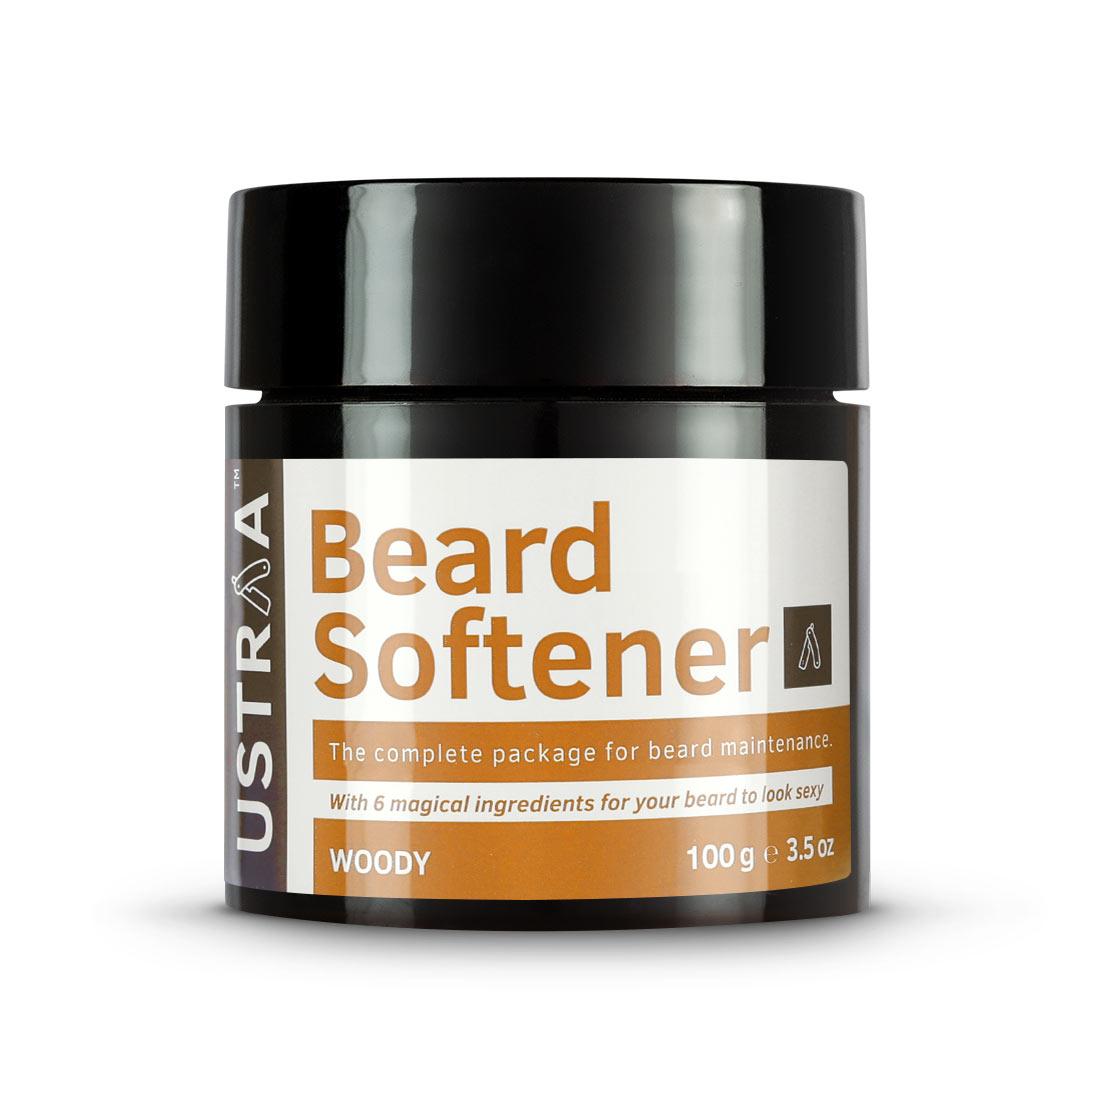 Ustraa Beard Softener Woody with 6 Magical Ingredients for a Nourished, Soft, and Healthy Beard that adds Shine and Swag